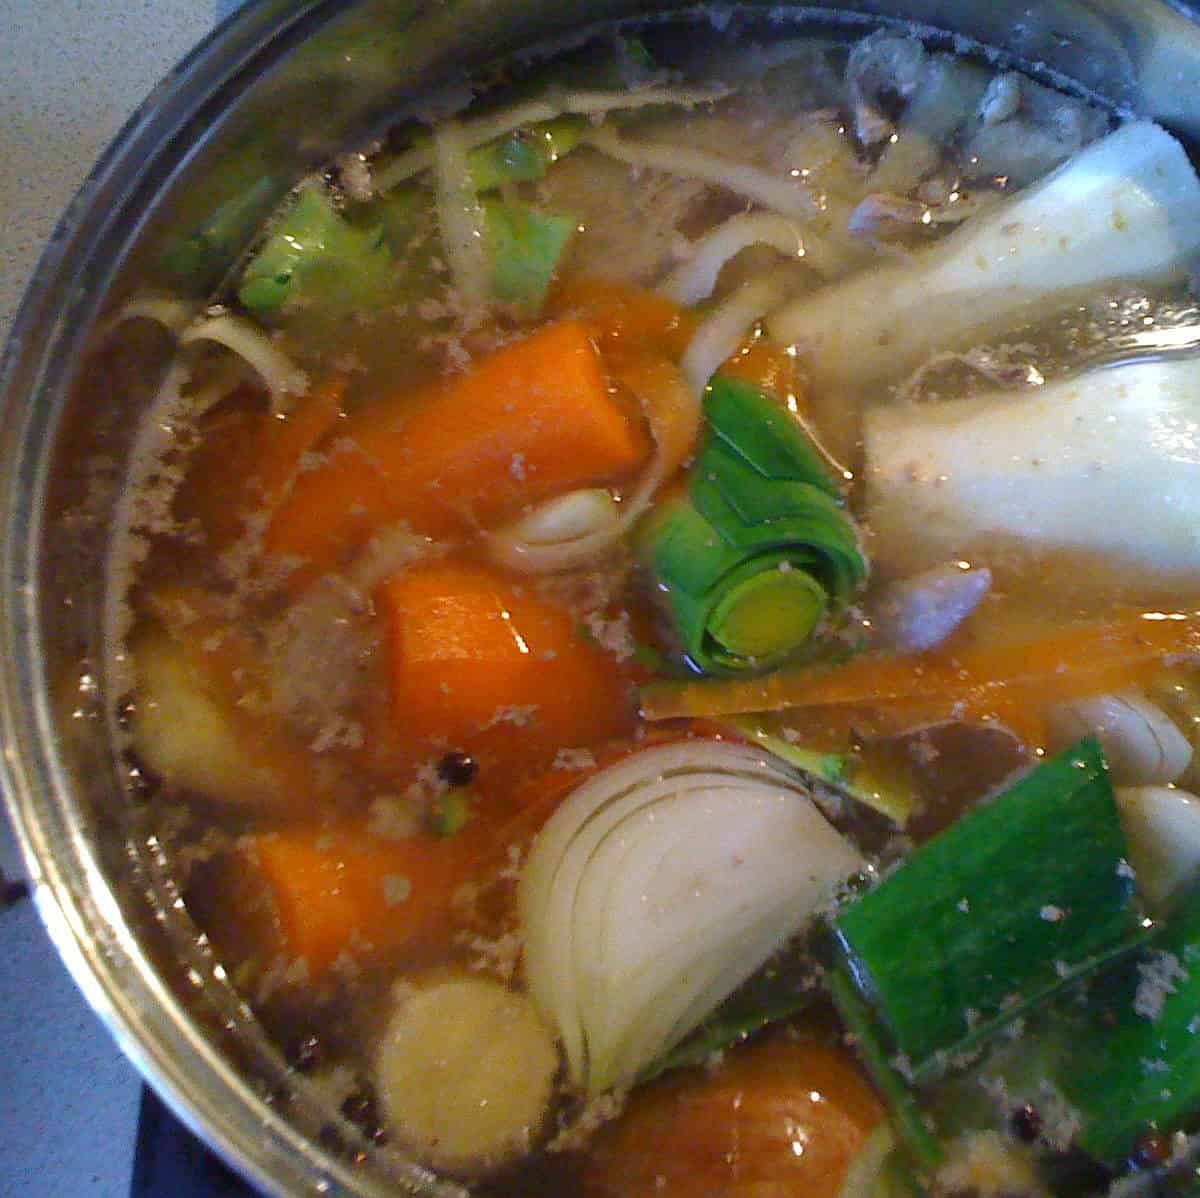  A warm bowl of chicken soup is like a hug in a bowl.